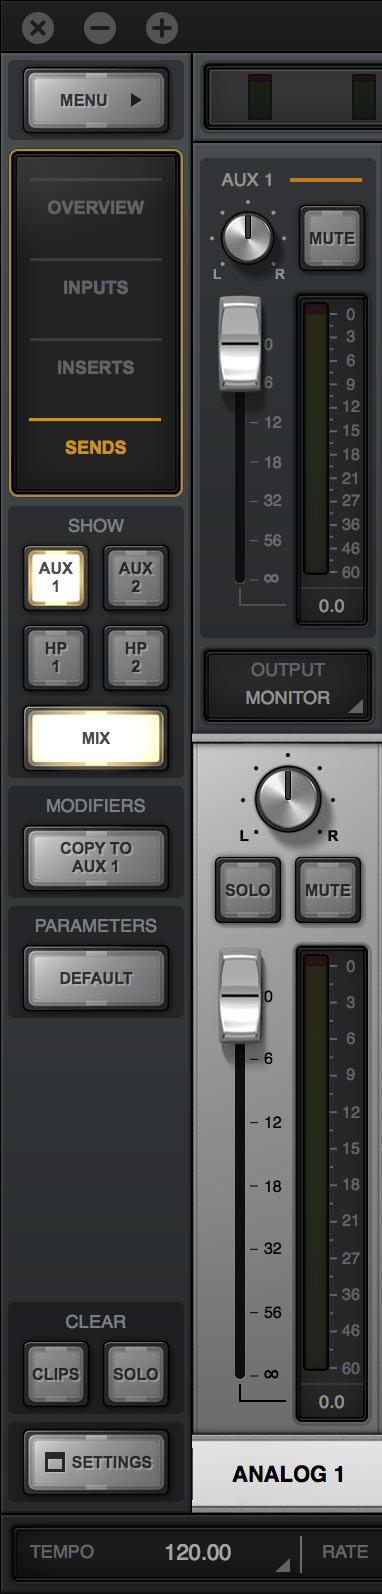 Show Sends In Sends View, all mix controls for a single send mix bus, and/or the monitor mix bus, are displayed for all Console inputs simultaneously (see screenshots below).